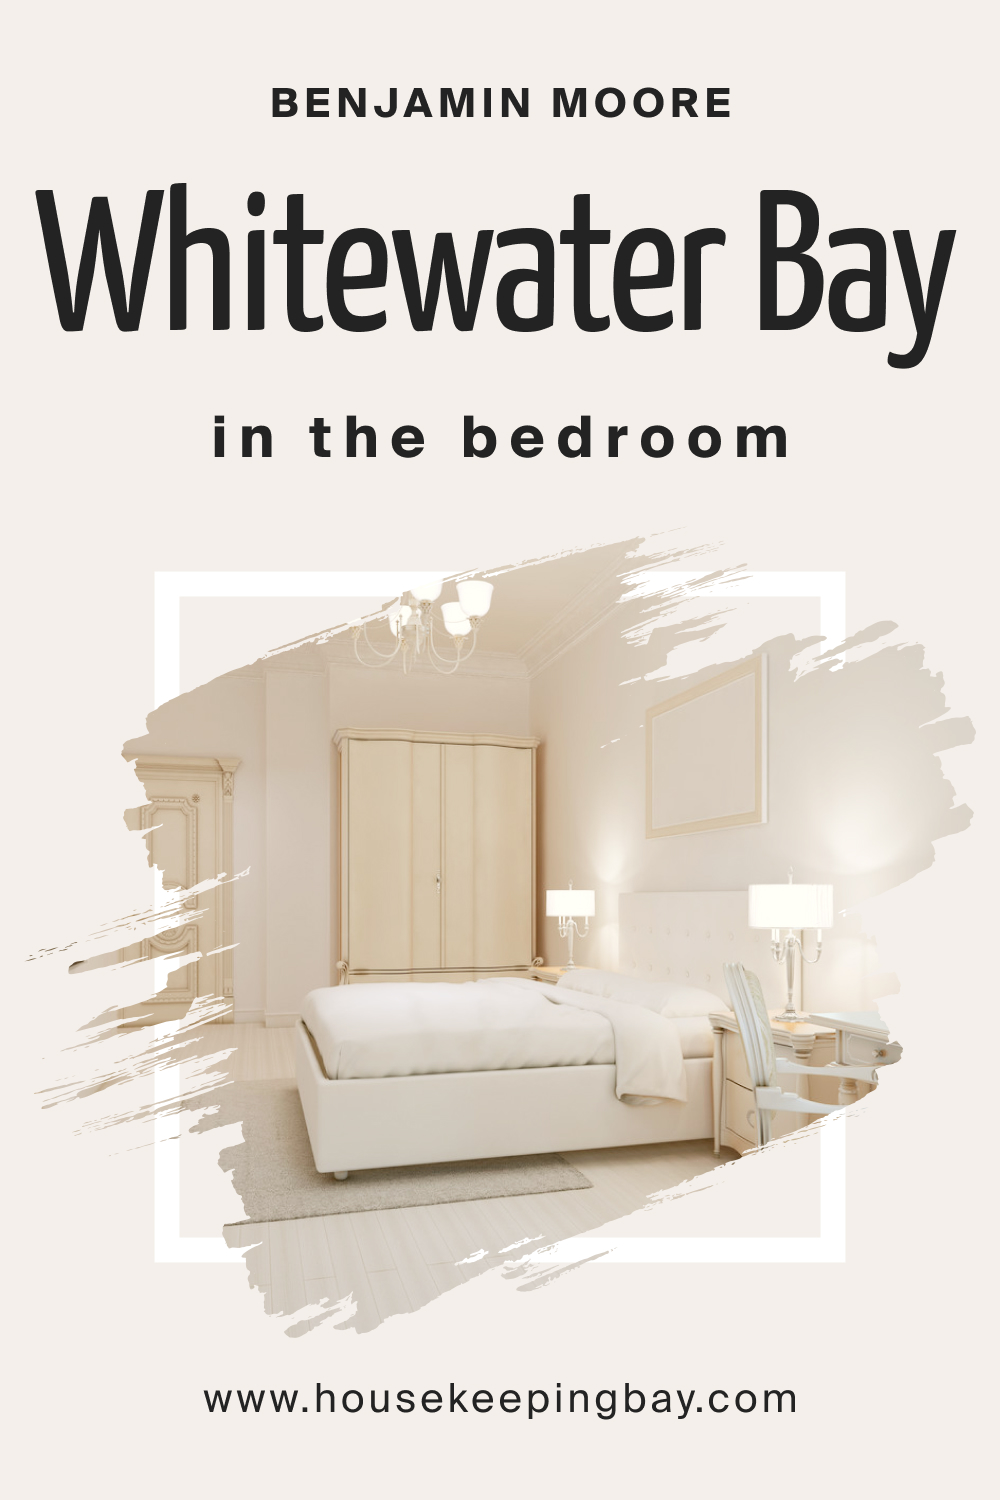 Benjamin Moore. Whitewater Bay OC 70 for the Bedroom